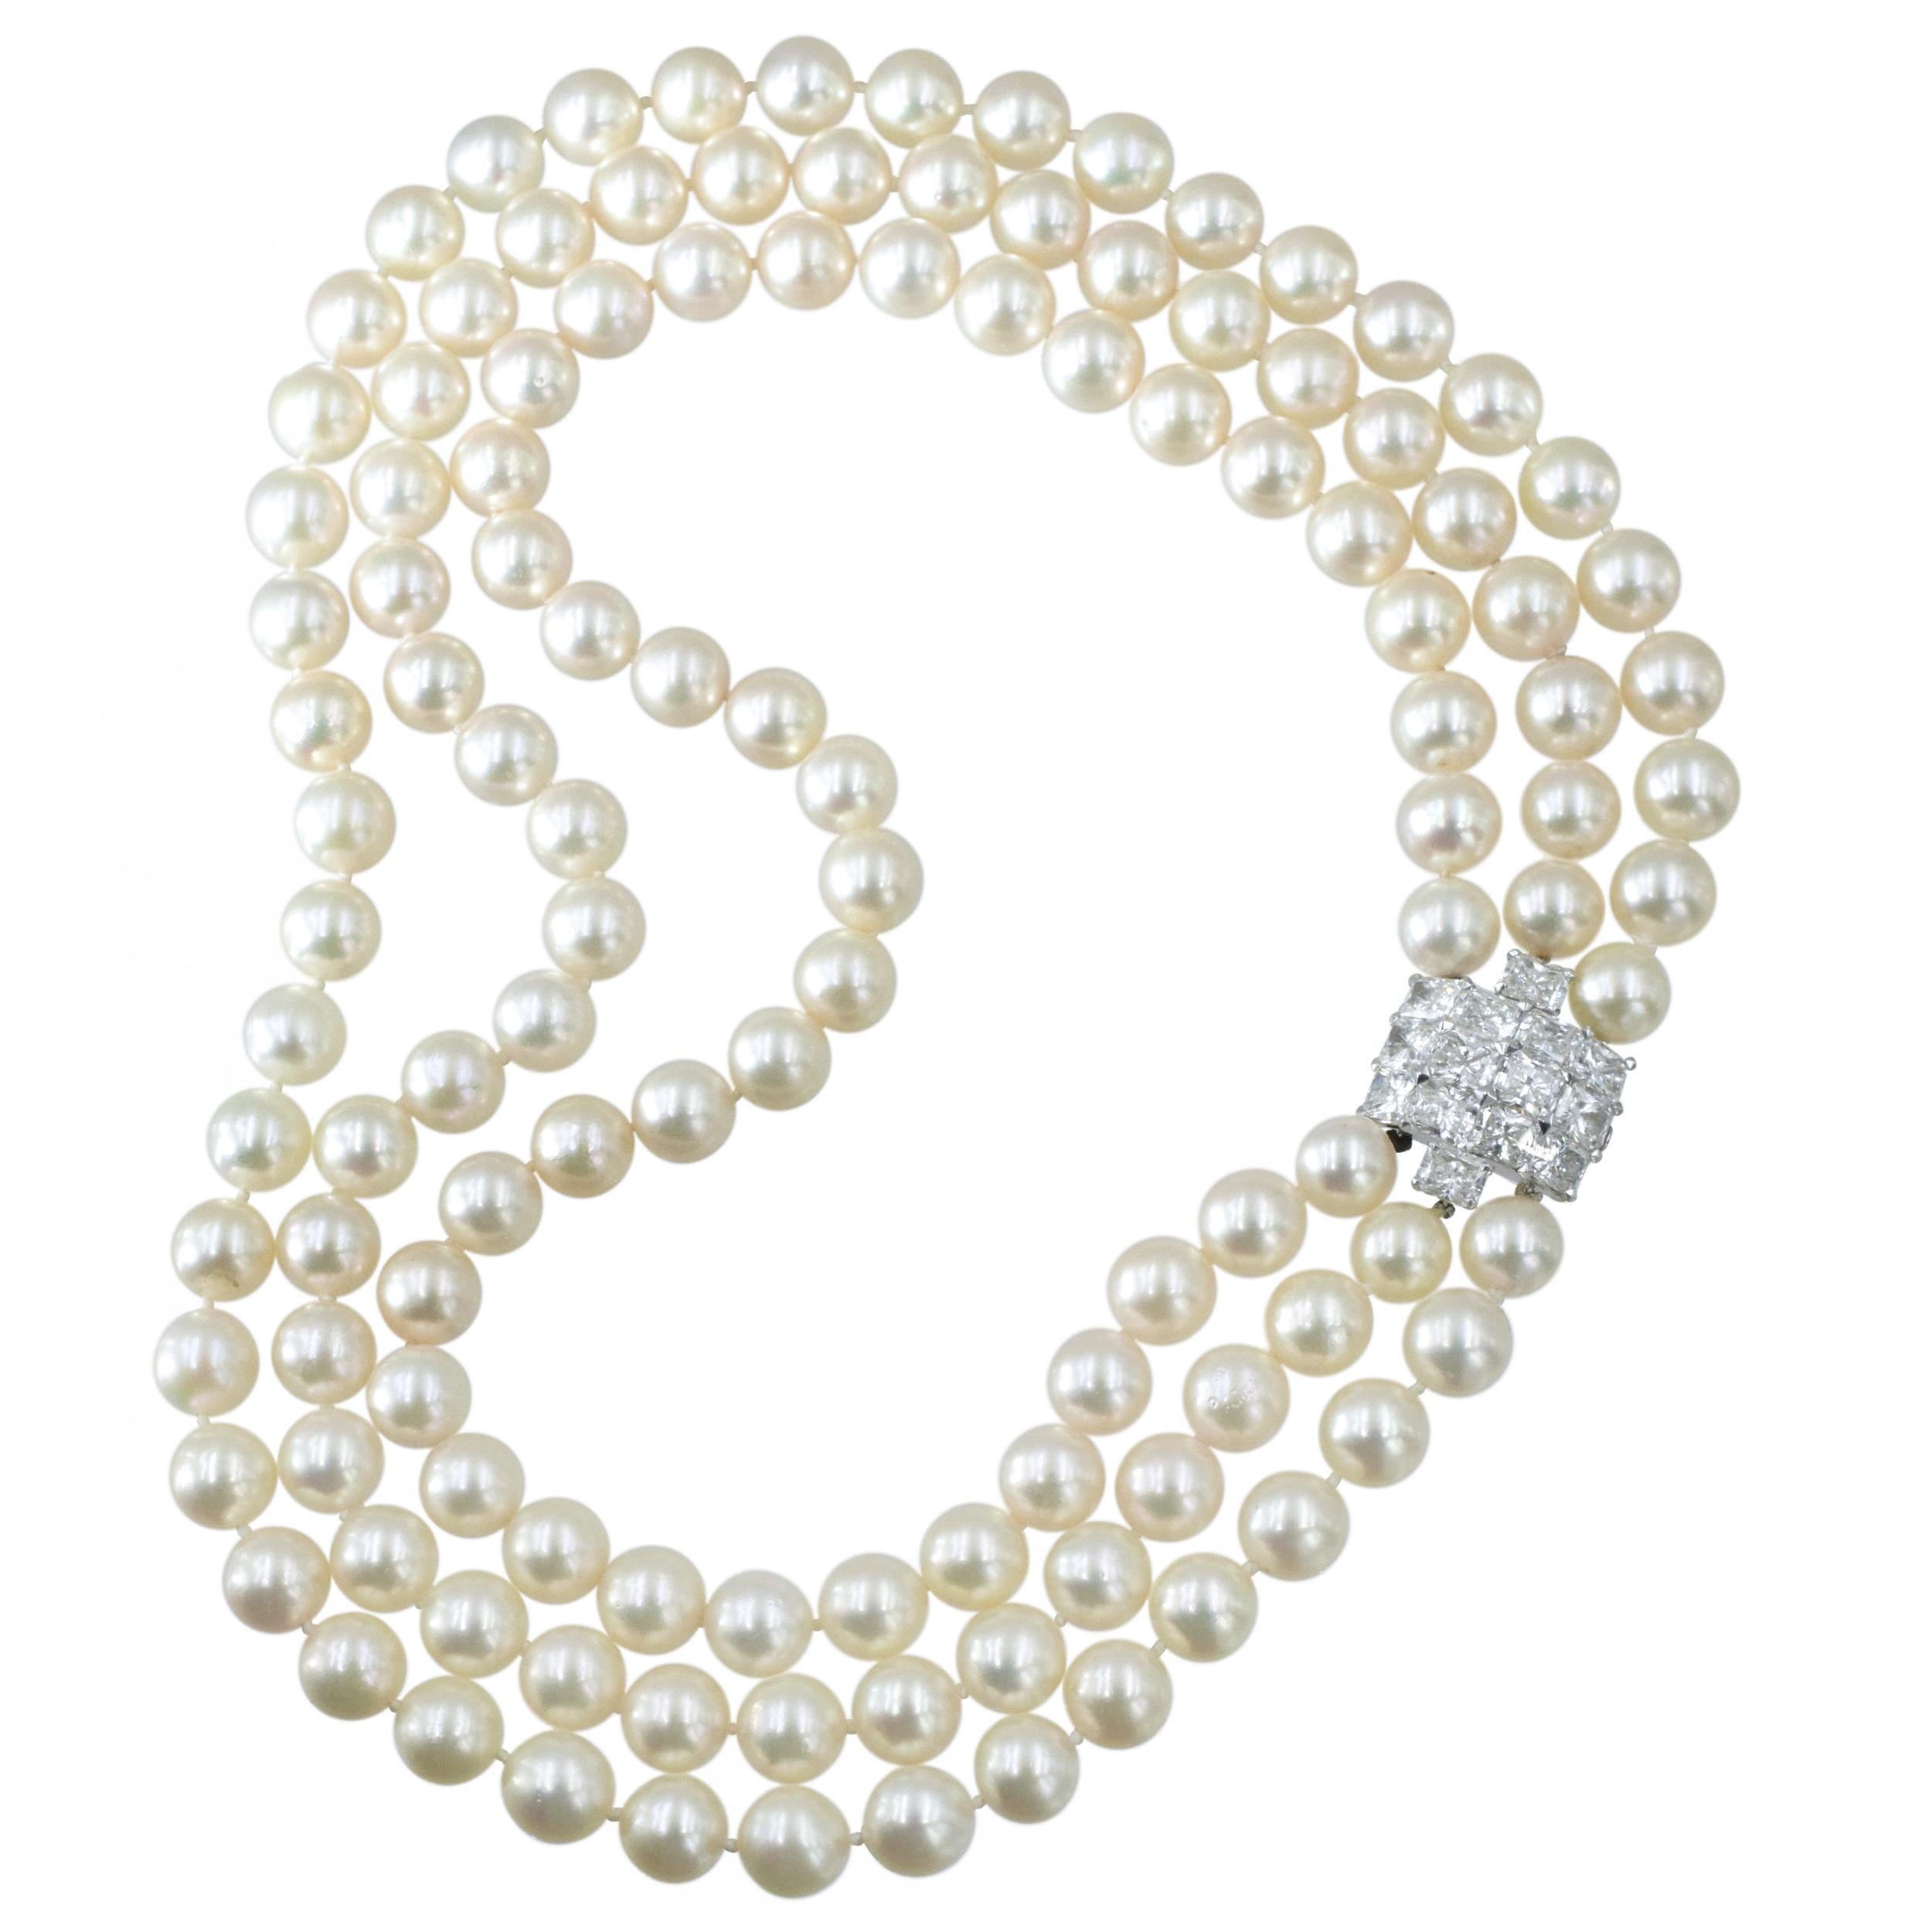 Cartier Triple Strand Cultured Pearl Necklace with Platinum and Diamond Clasp. Composed of three strands of pearls ap. 10.0 to 9.3 mm., completed by a clasp of 14 cut-cornered rectangular modified brilliant diamonds weighing total of approximately